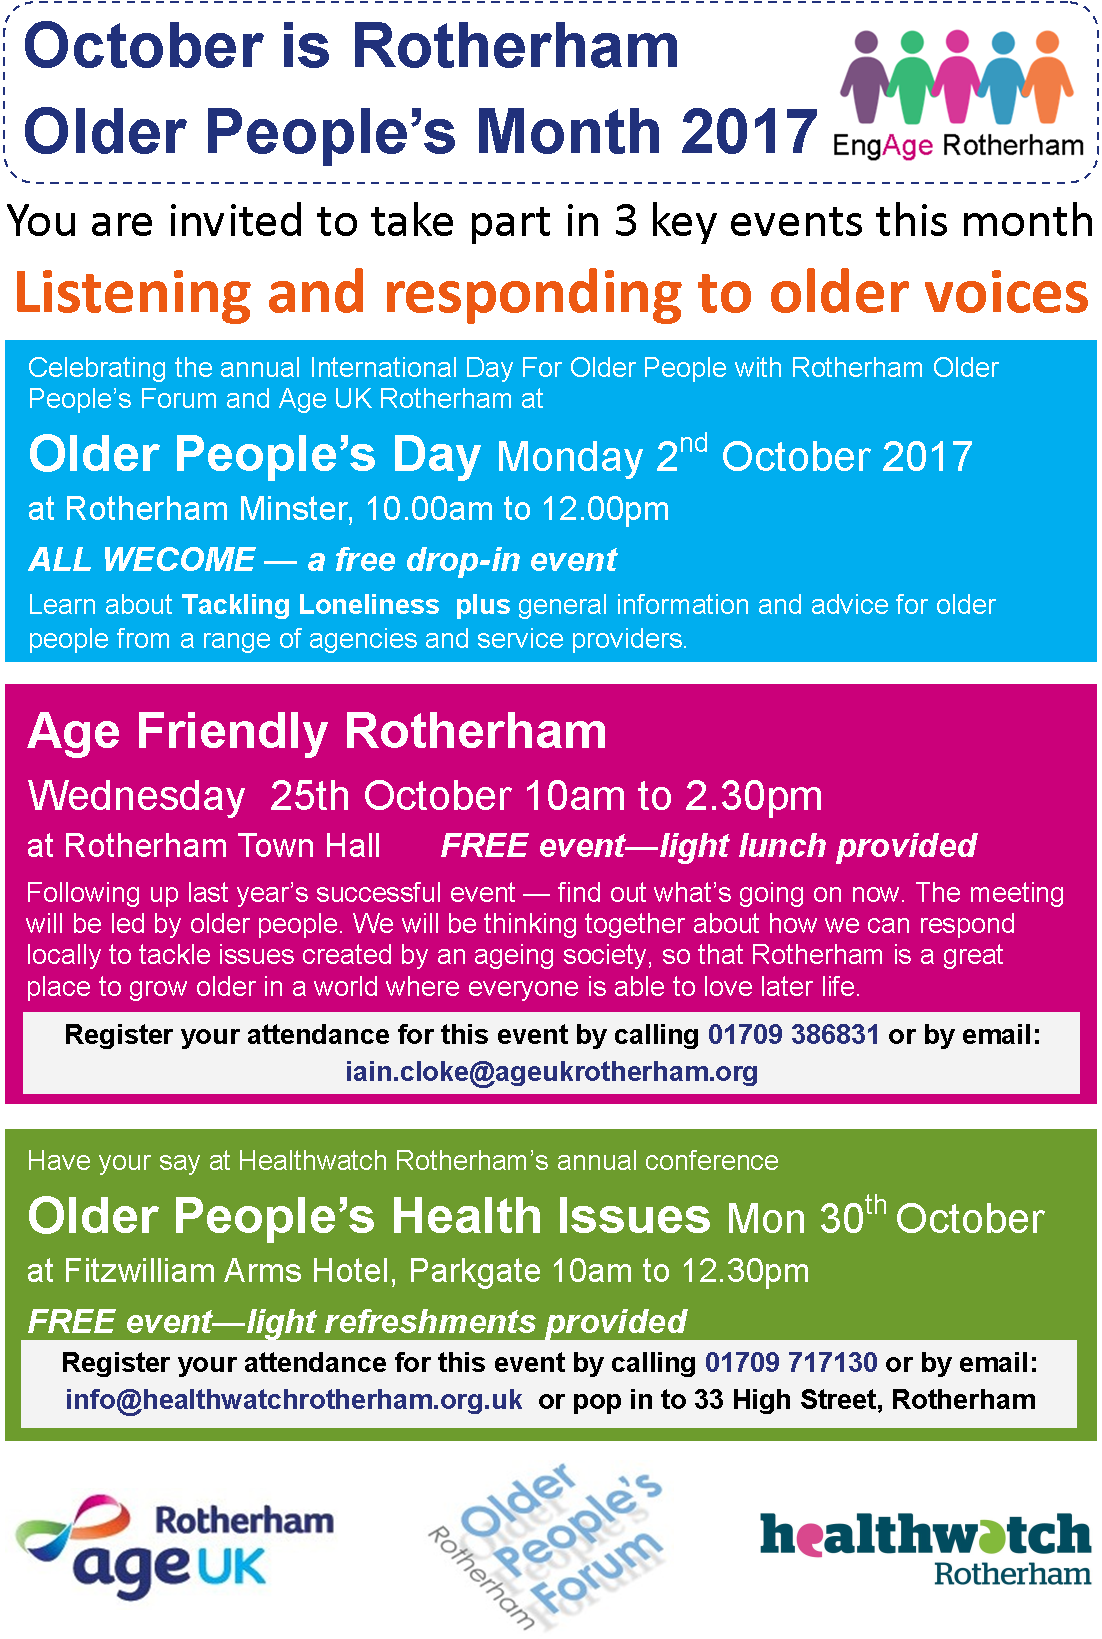 Information about three key events being held during Rotherham Older People's Month 2017